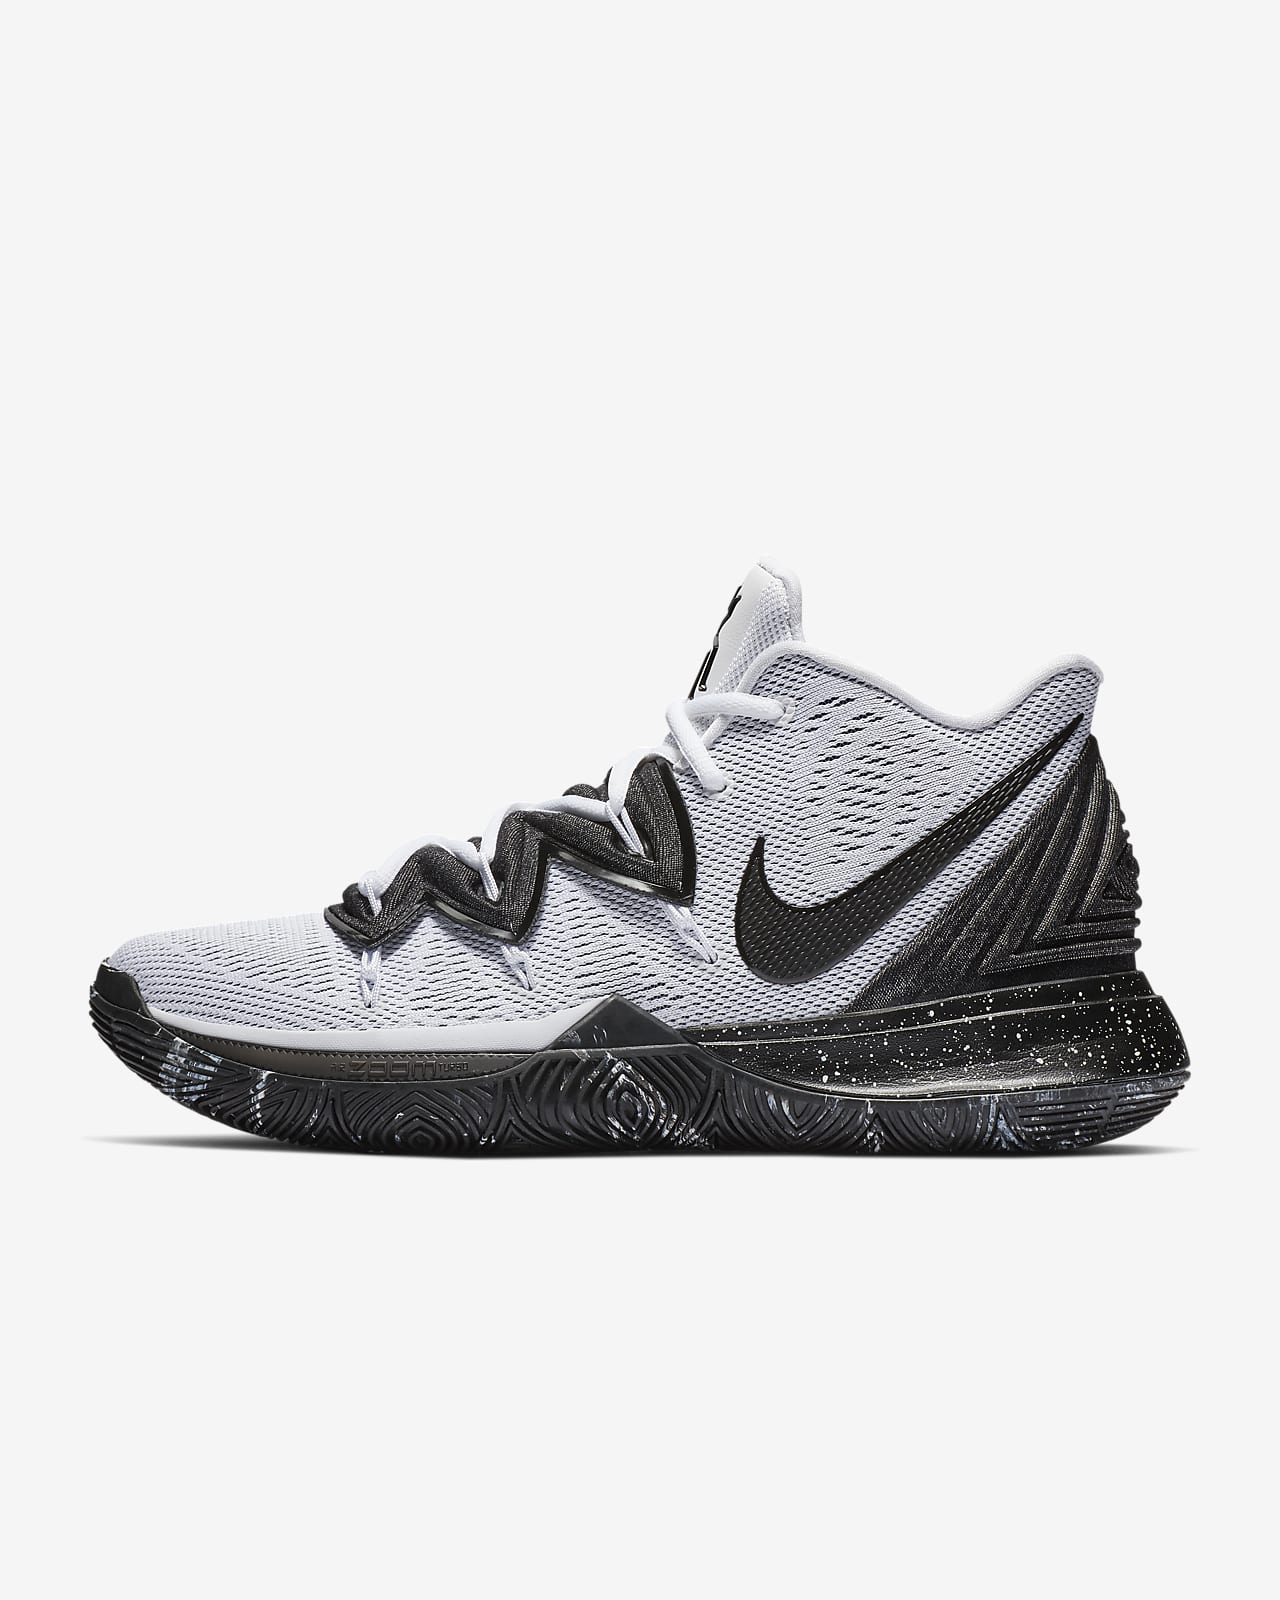 kyrie 5 shoes size 6